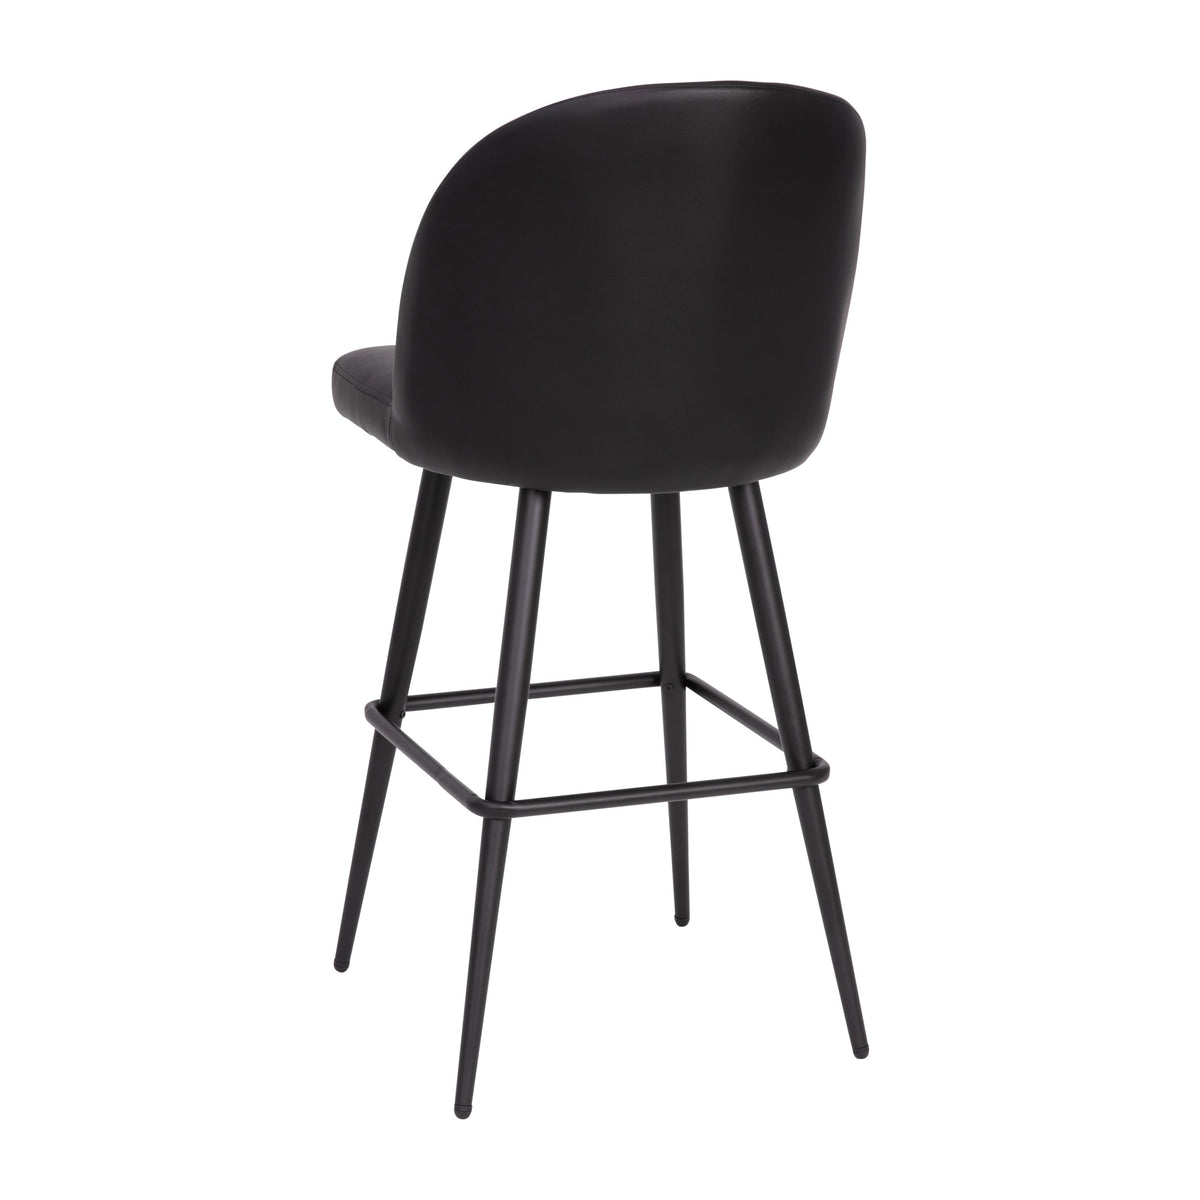 Black LeatherSoft |#| Commercial Grade 30inch Armless Barstool with Contoured Back in Black LeatherSoft